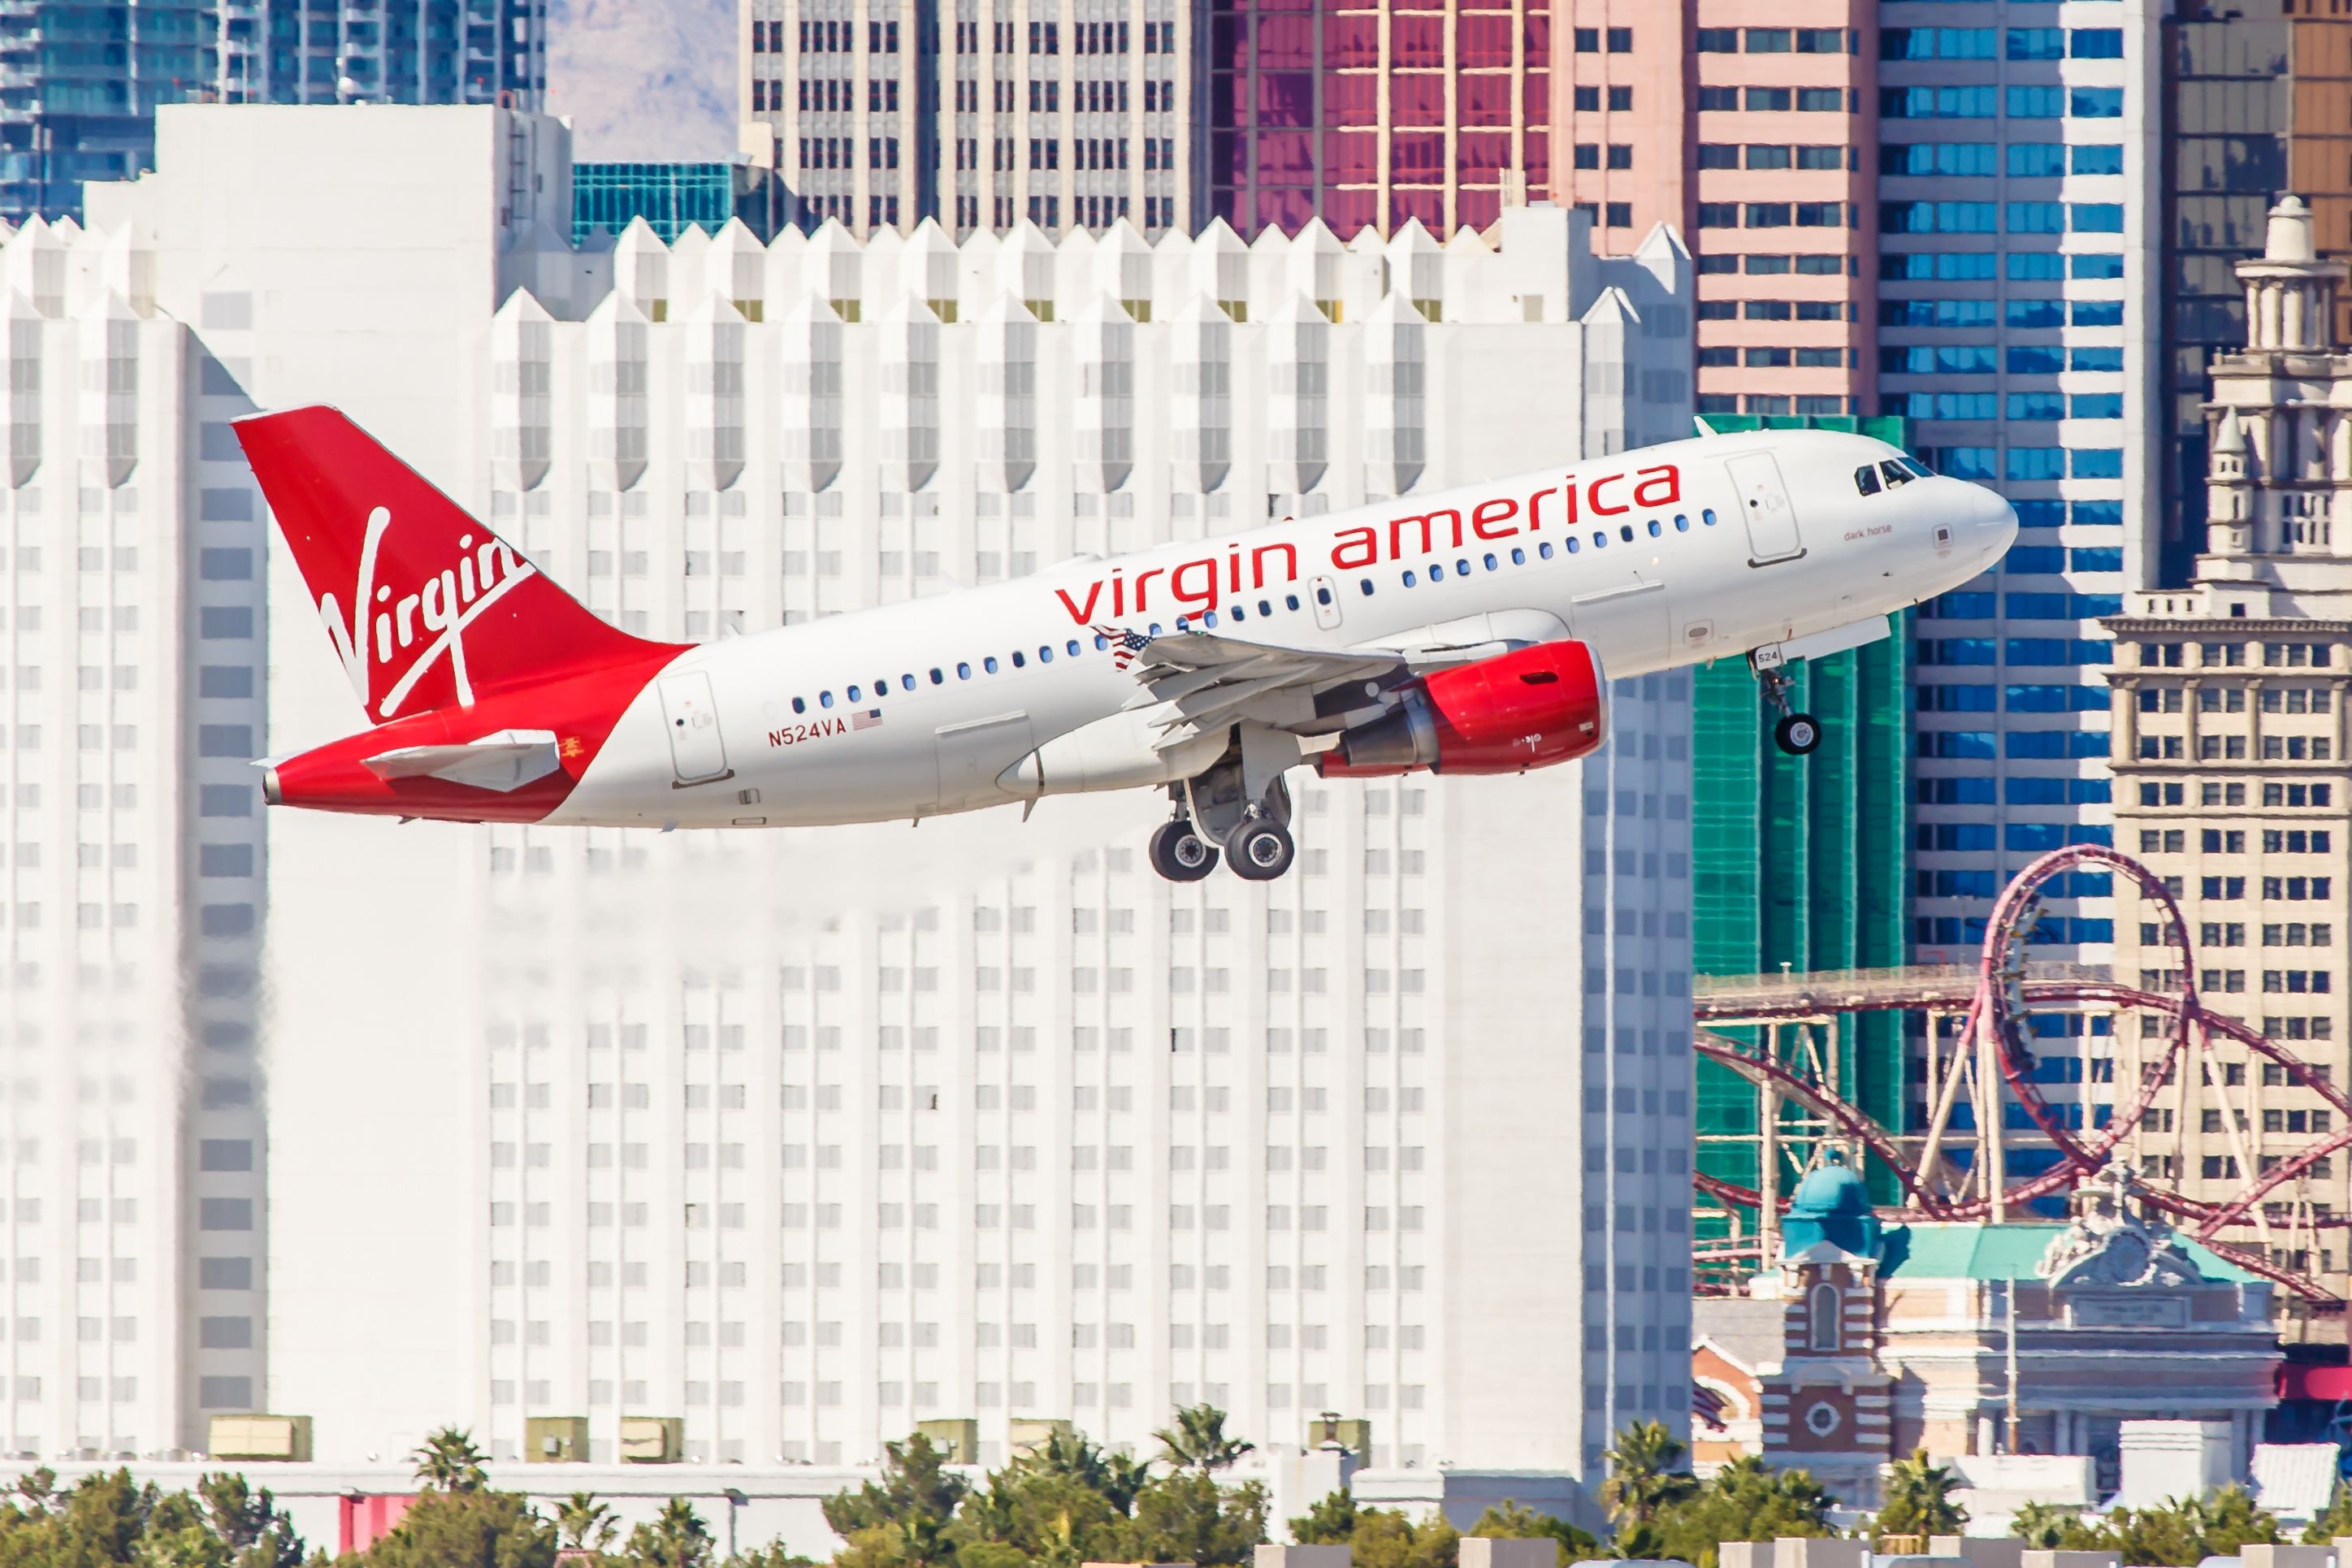 Airbus A320 Virgin America takes off from McCarran Airport located in Las Vegas, NV on November 3, 2014. 